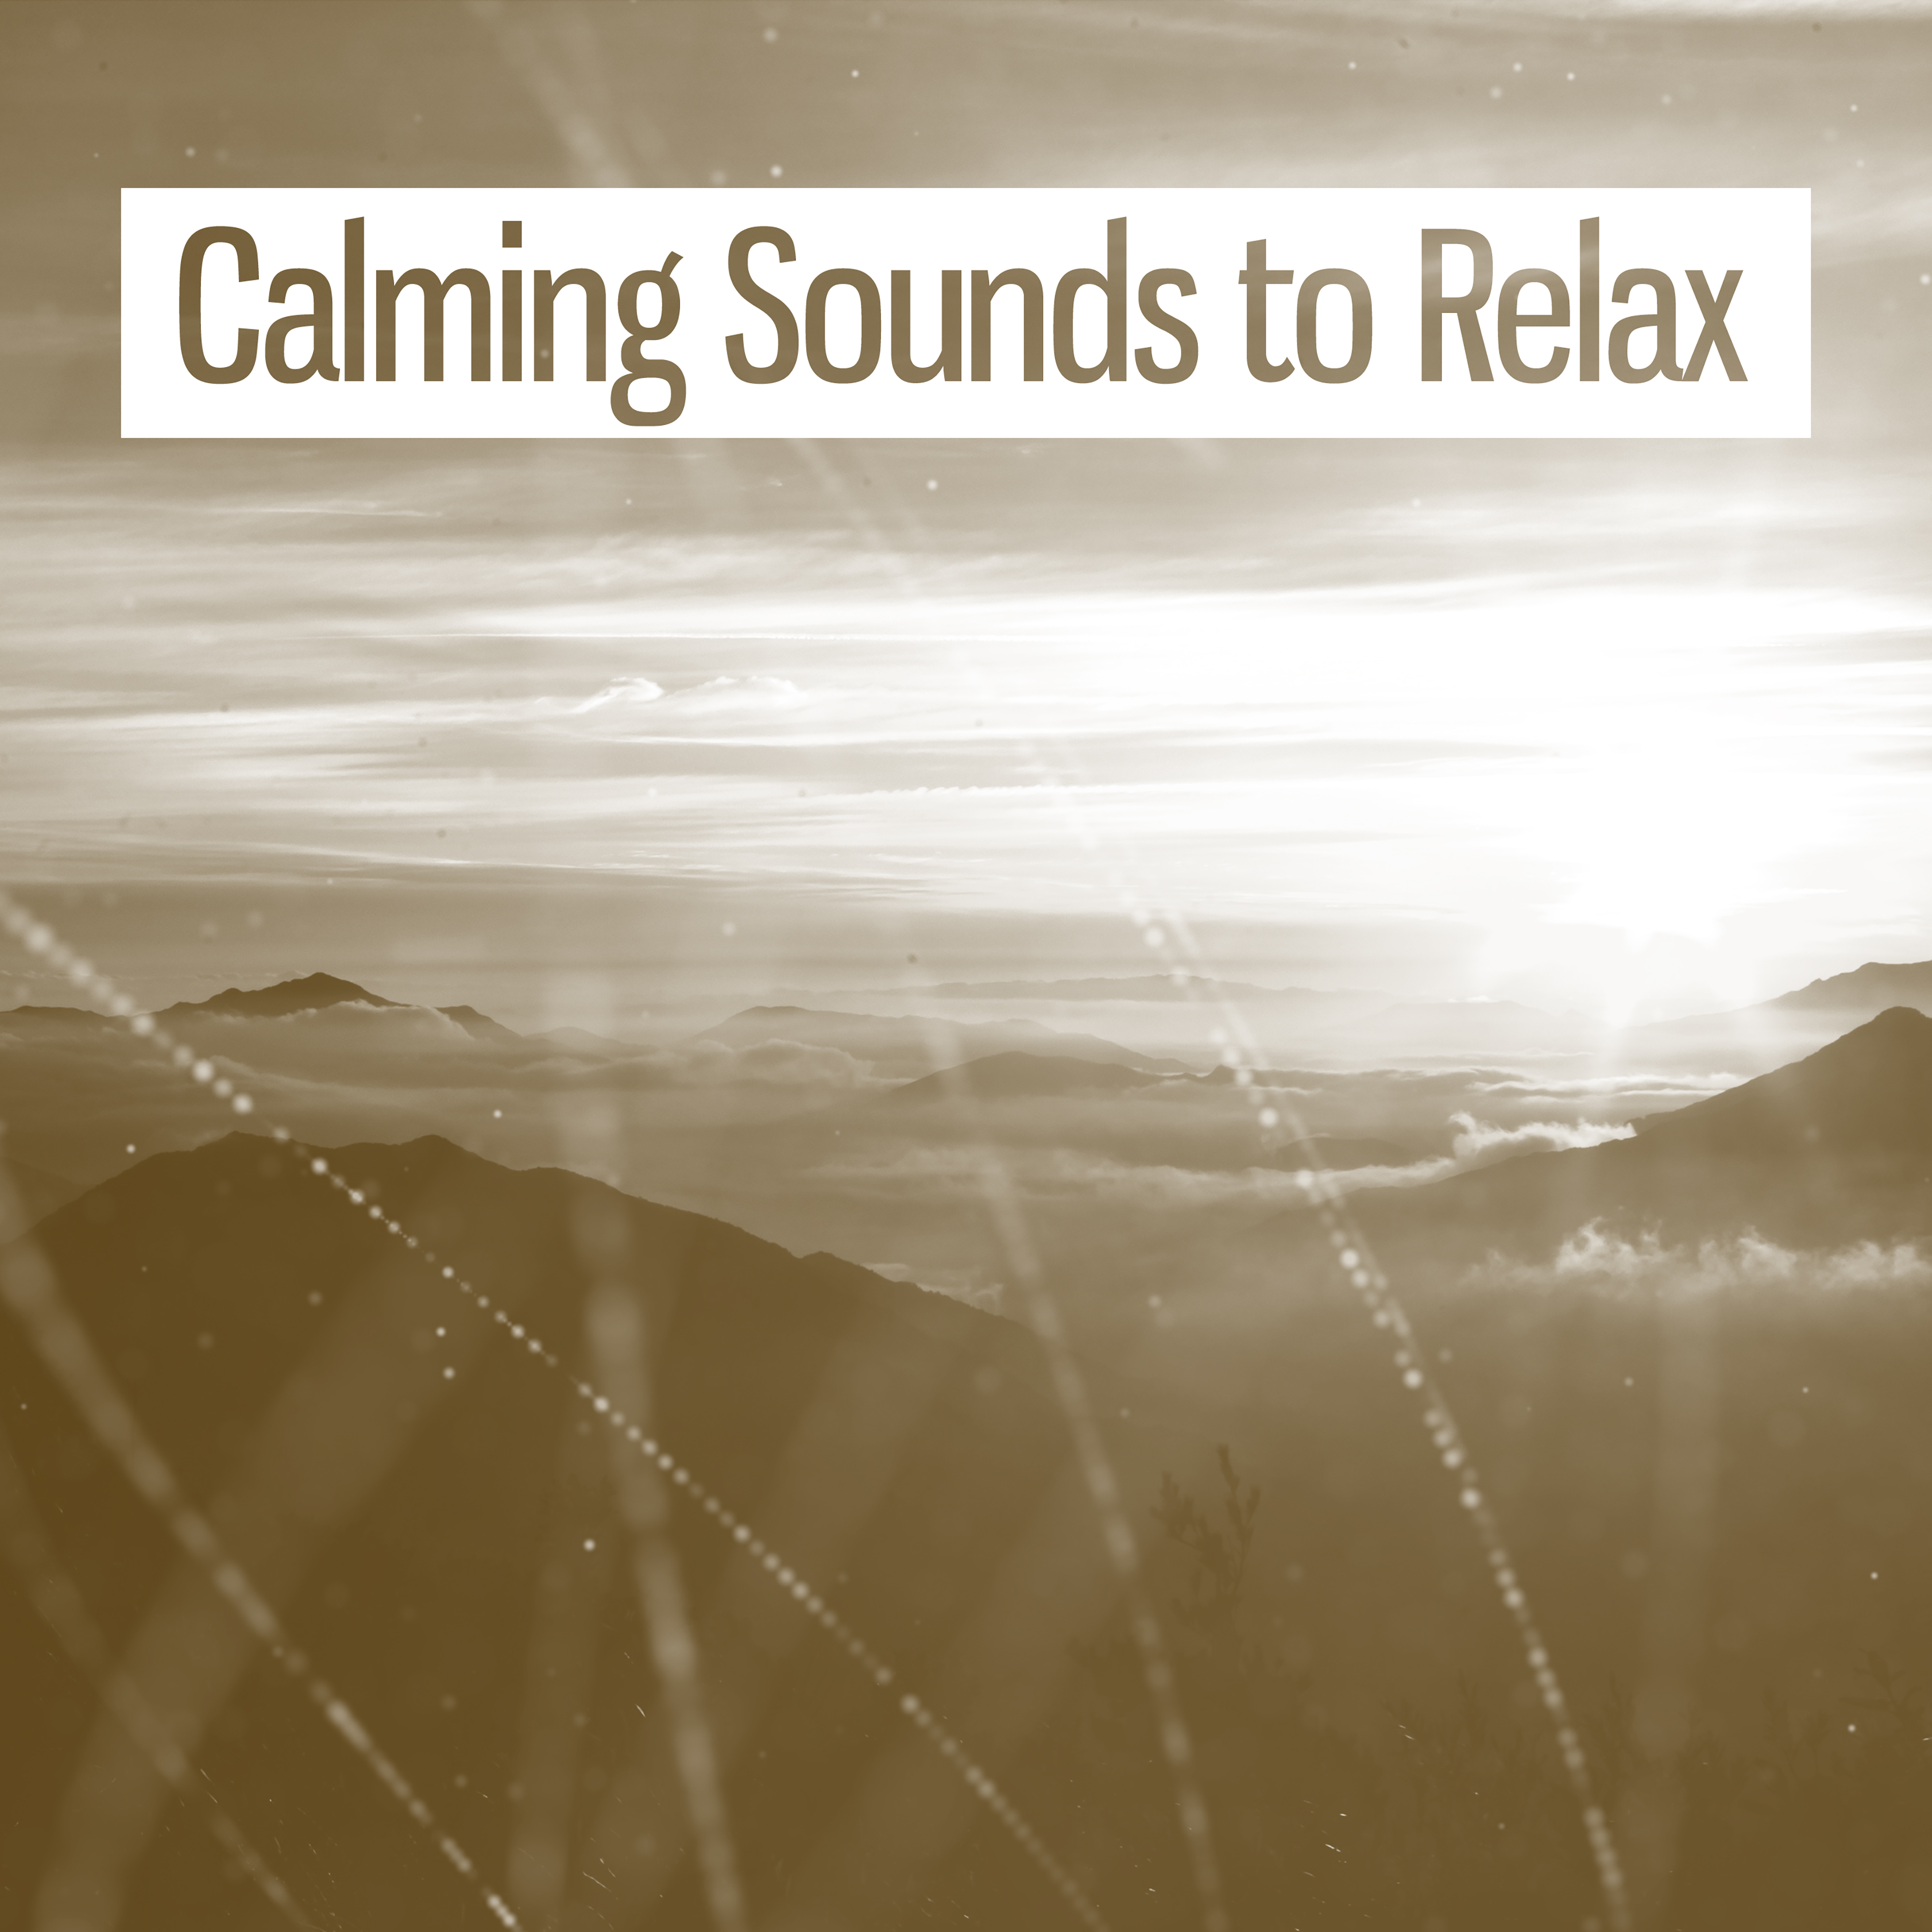 Calming Sounds to Relax  Rest with New Age Music, Soft Sounds, Easy Listening